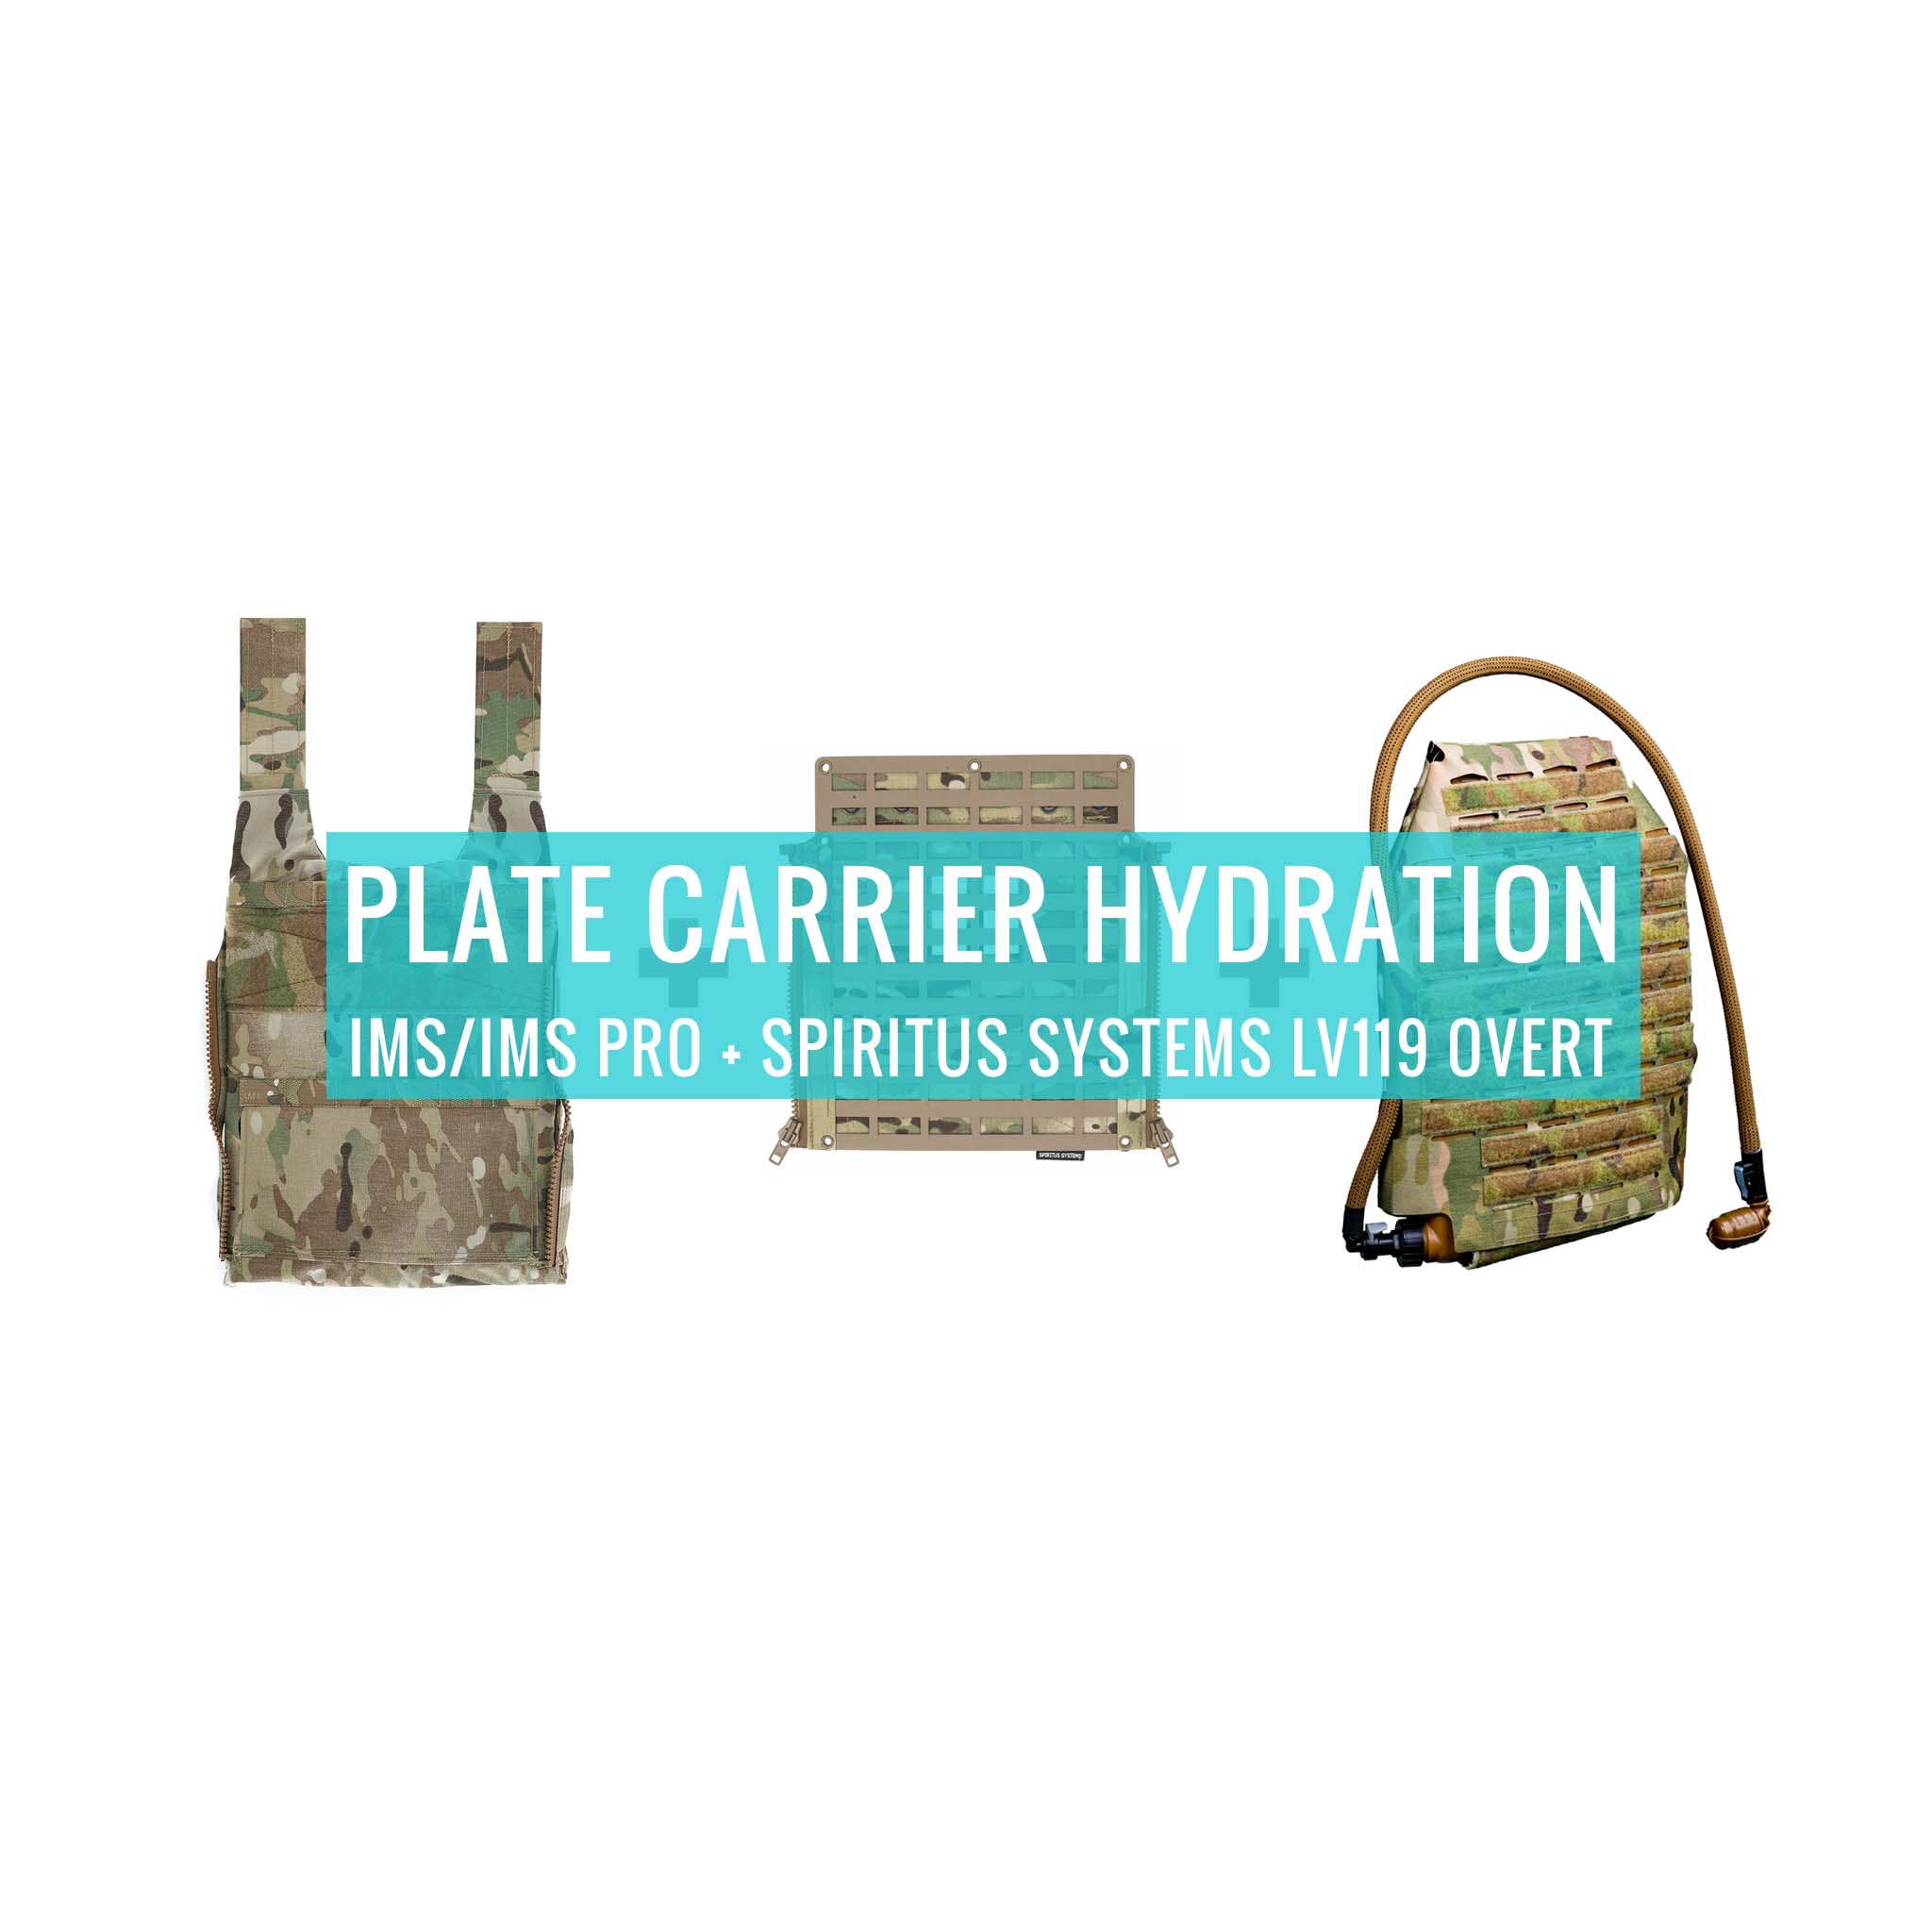 How do I run IMS or IMS Pro Hard Cell Plate Carrier Hydration